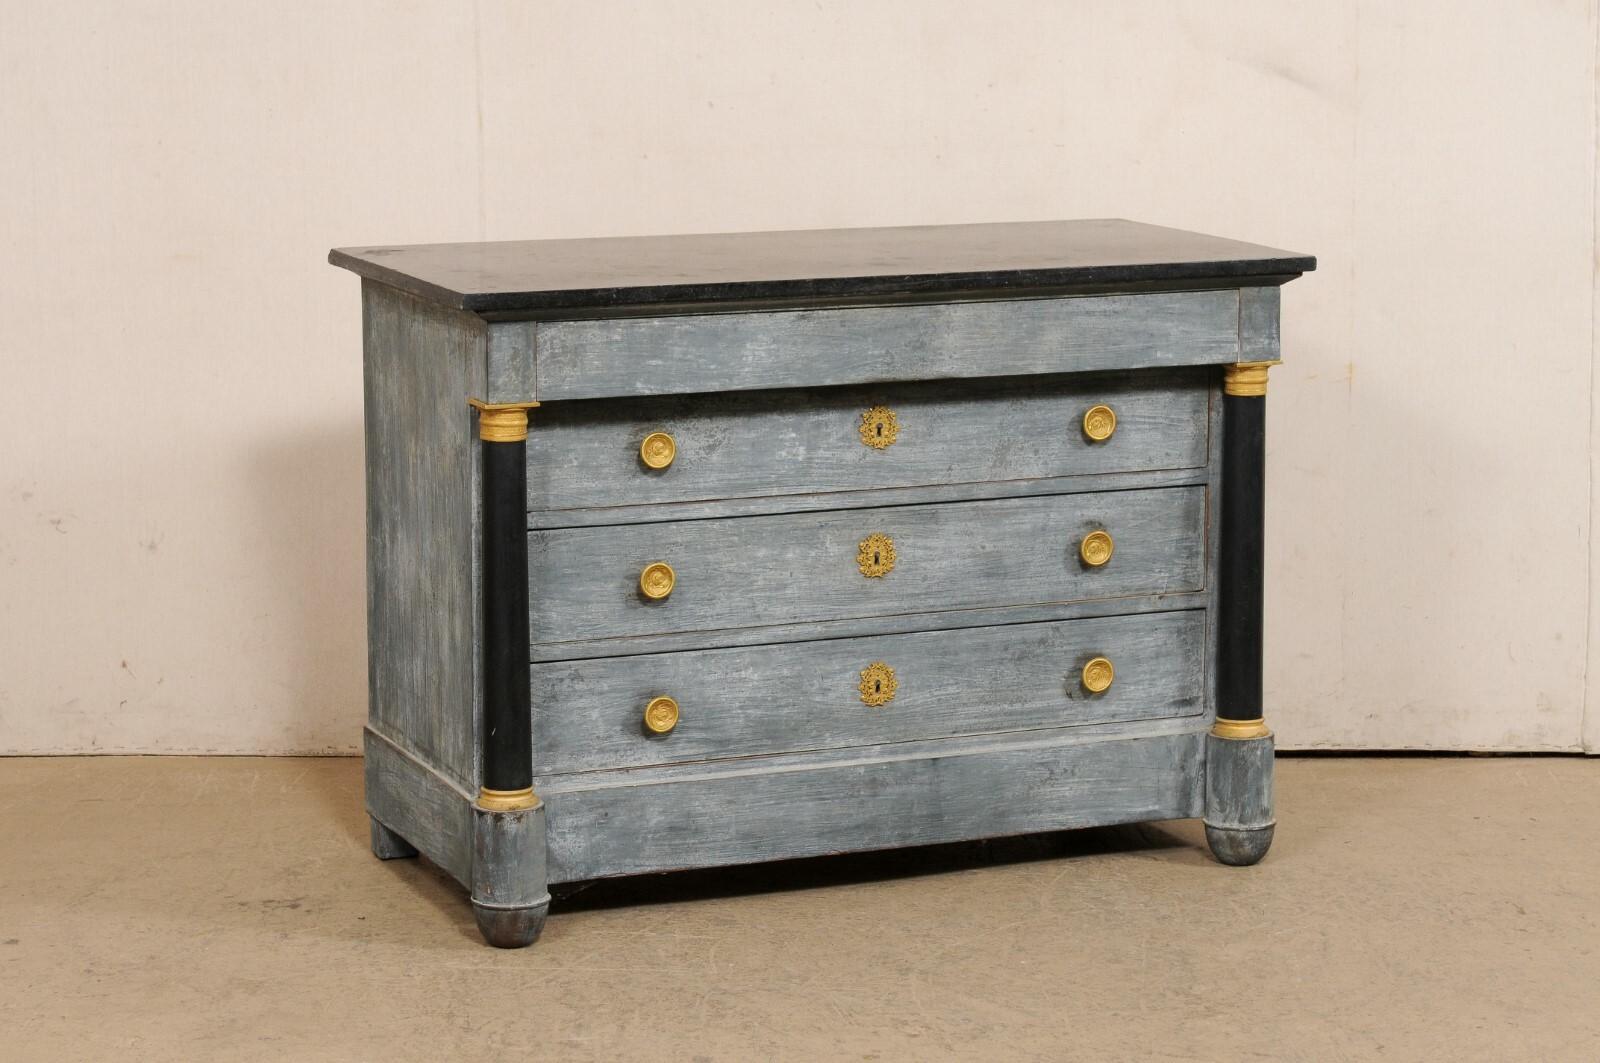 A French Empire painted commode, with marble top and brass accents, from the mid 19th century. This antique chest from France features a rectangular-shaped marble top which rests above a case which houses four graduated drawers (top drawer is hidden